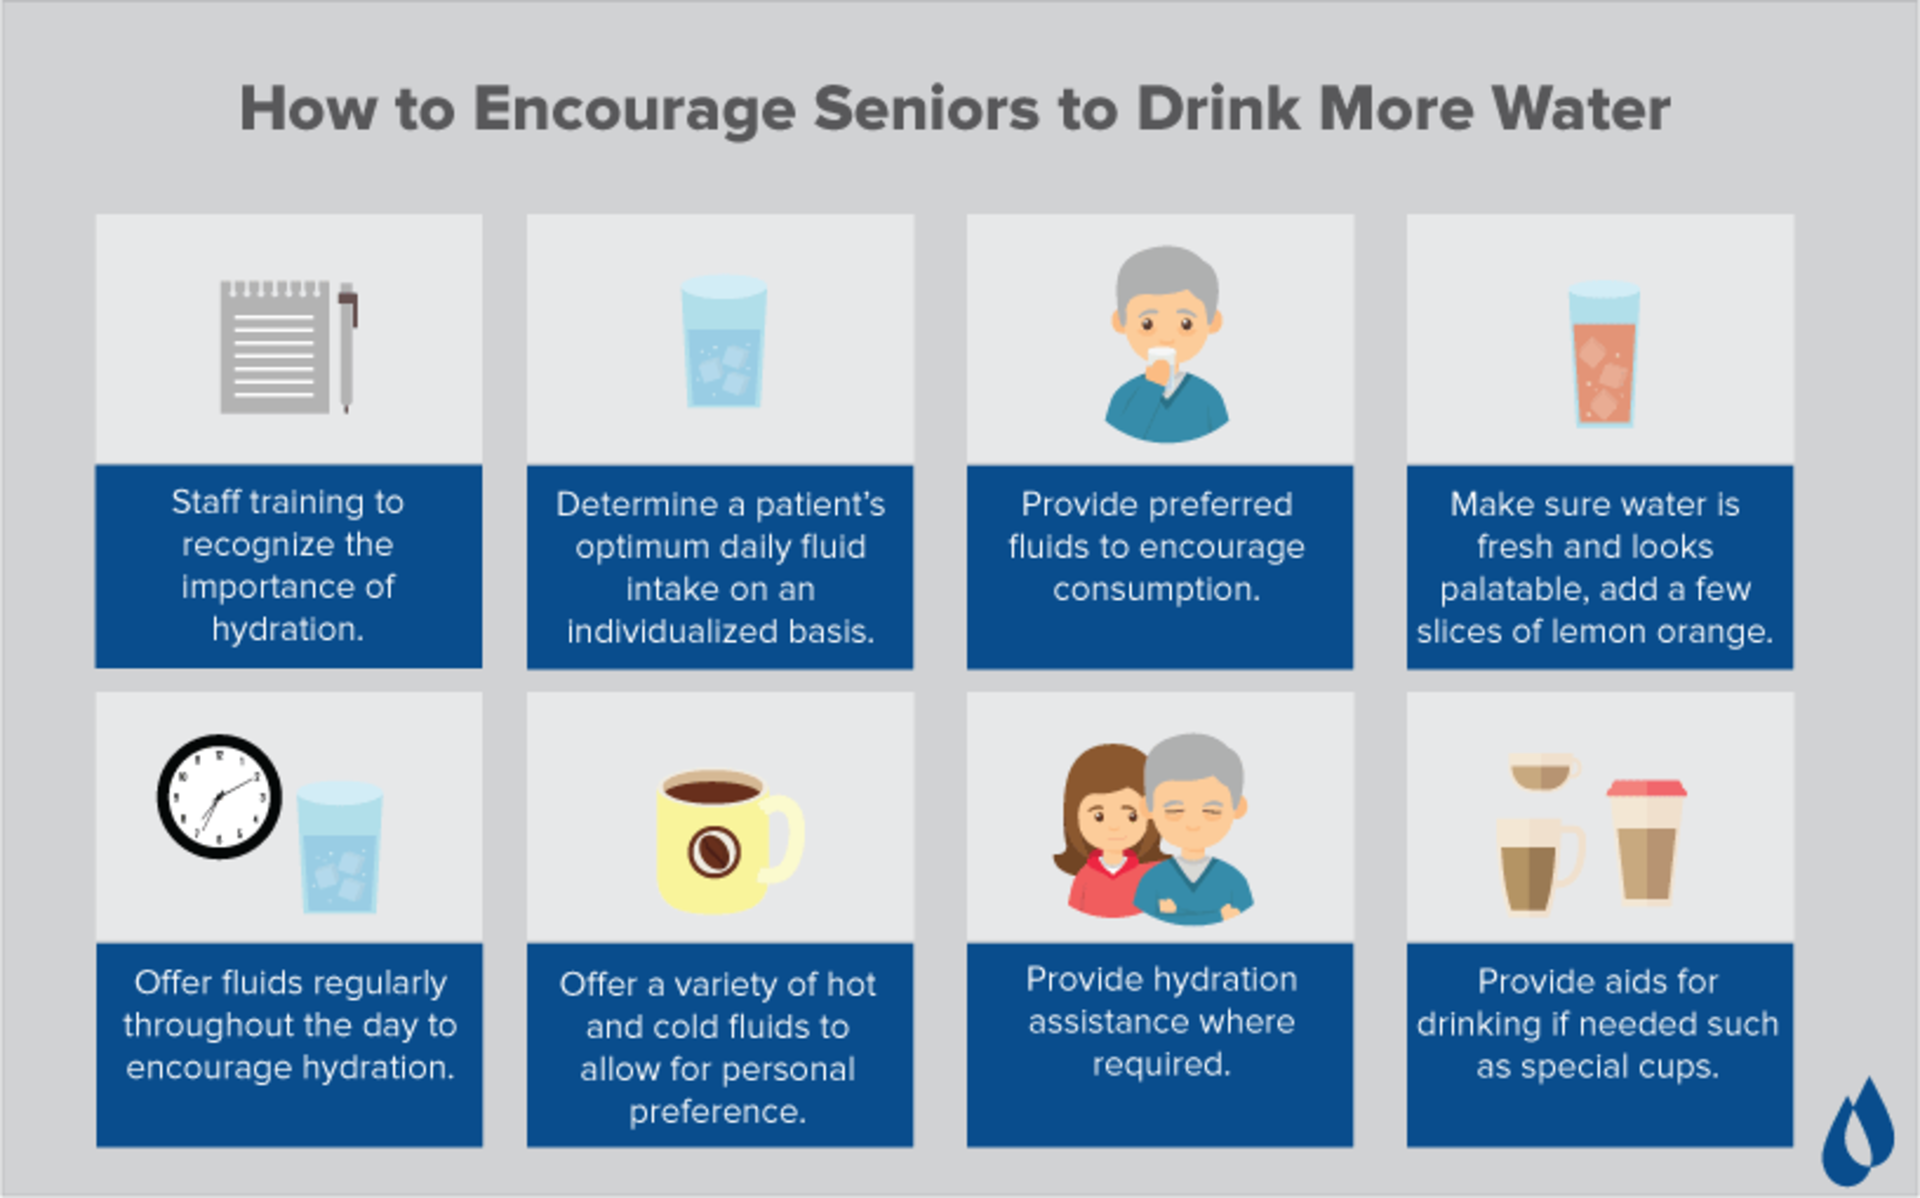 How to encourage seniors to drink more water